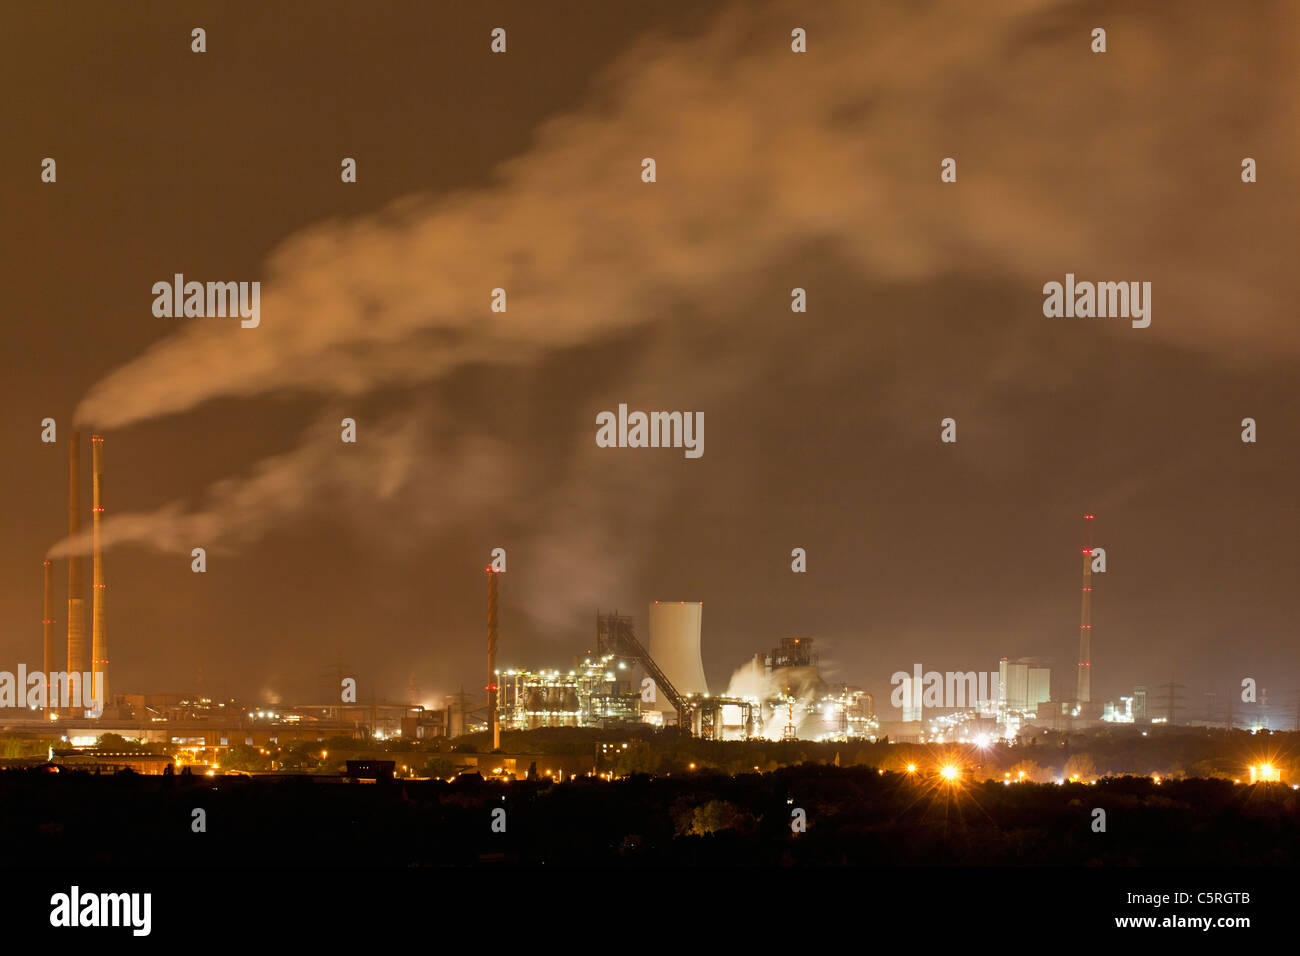 Germany, Nordrhein-Westfalen, Duisburg, View of smoke stacks of industrial plant at night Stock Photo